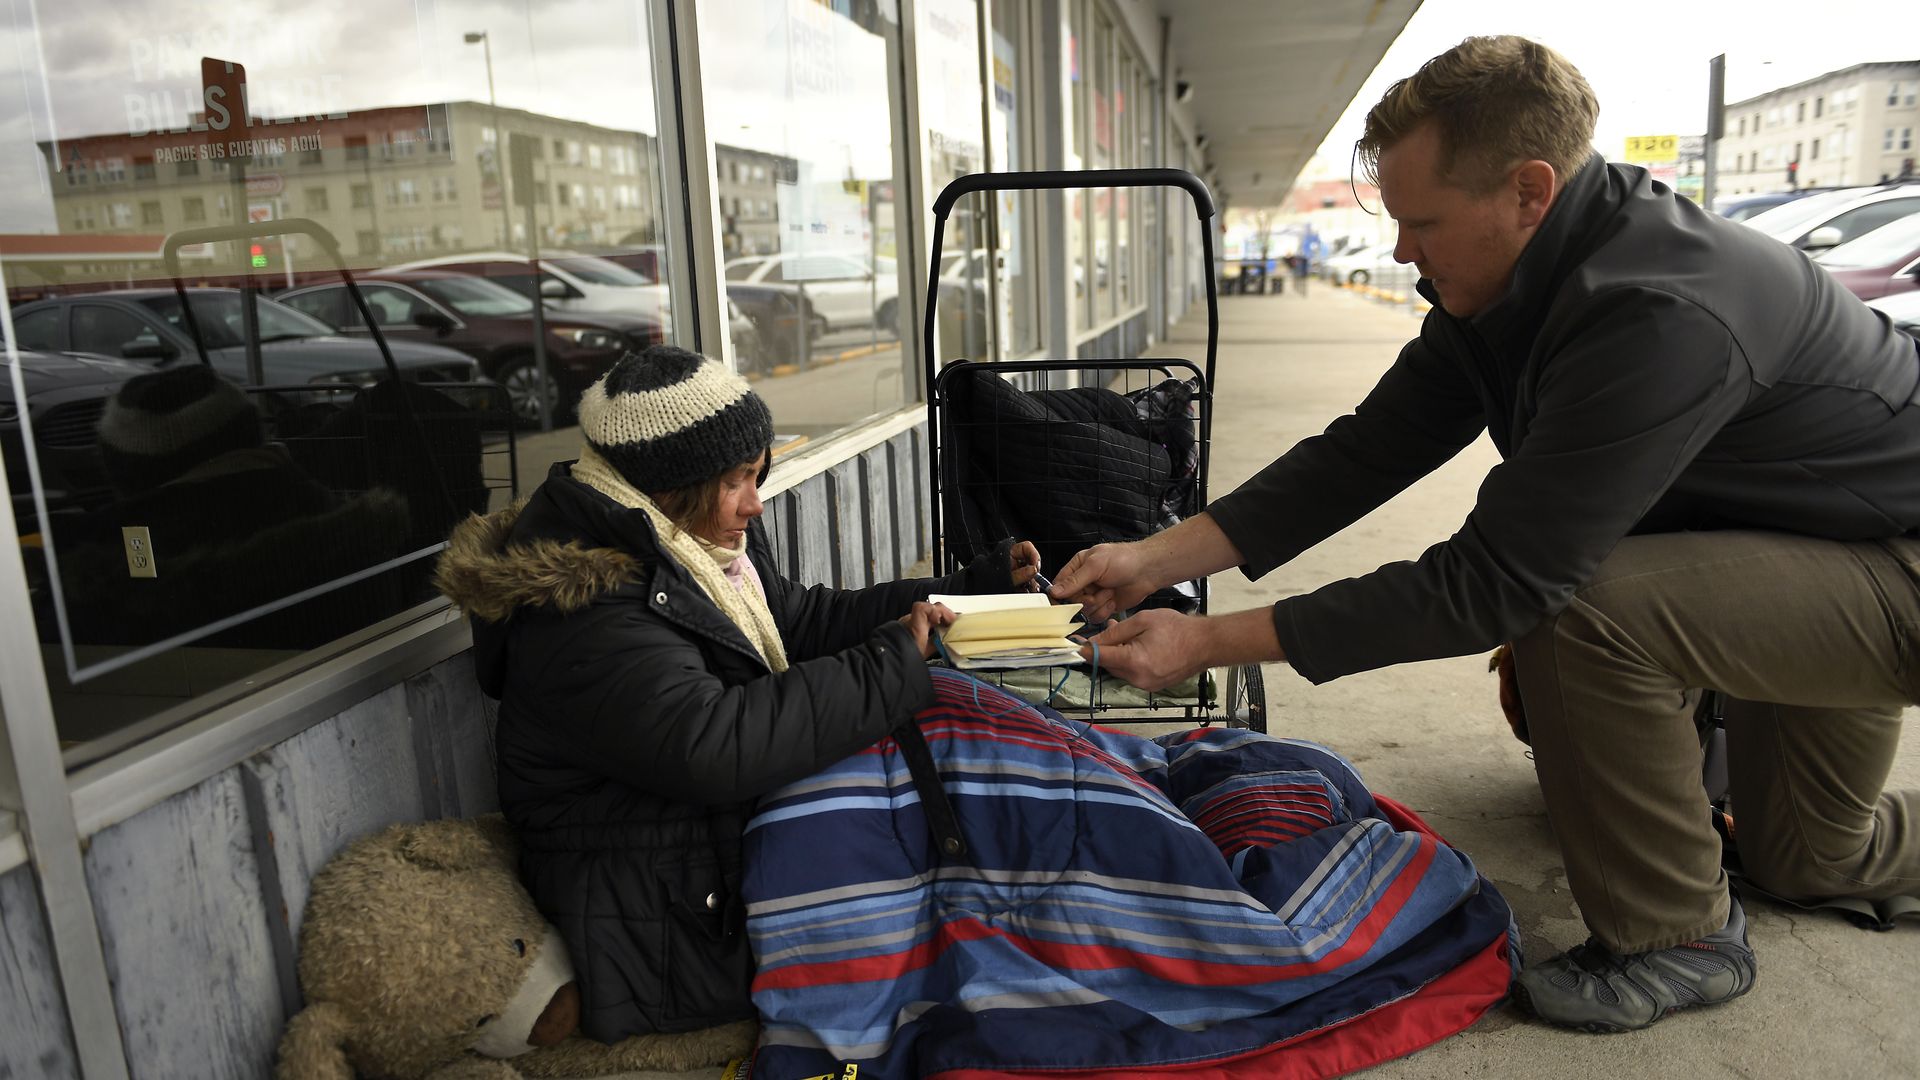 A photo of a social worker helping a homeless woman on the sidewalk